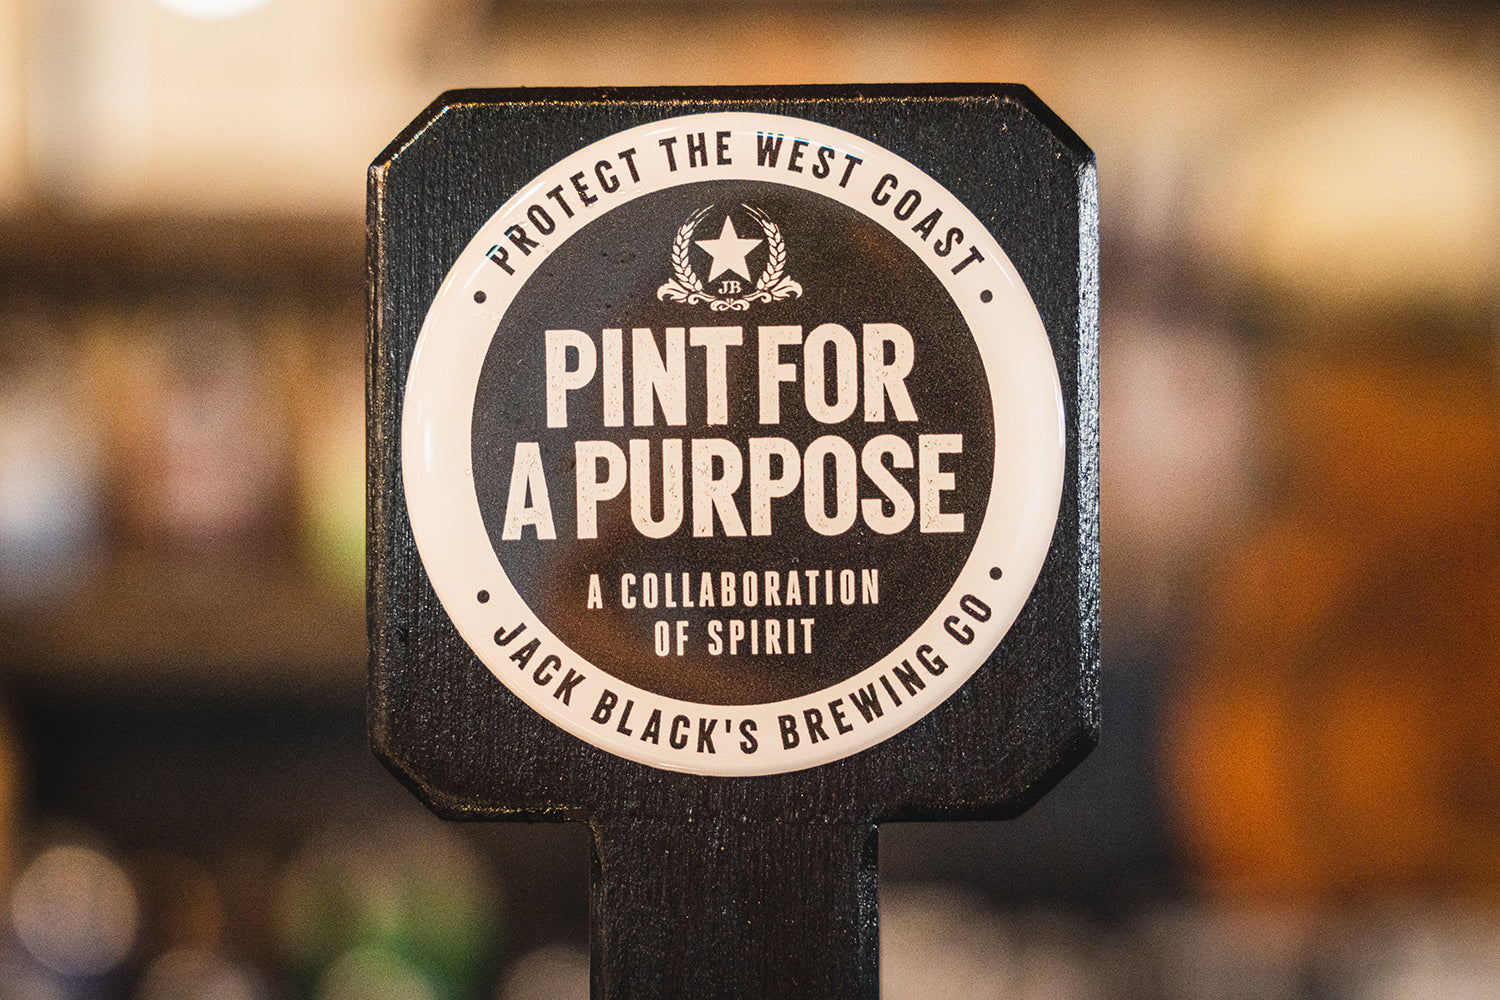 Pint for a Purpose